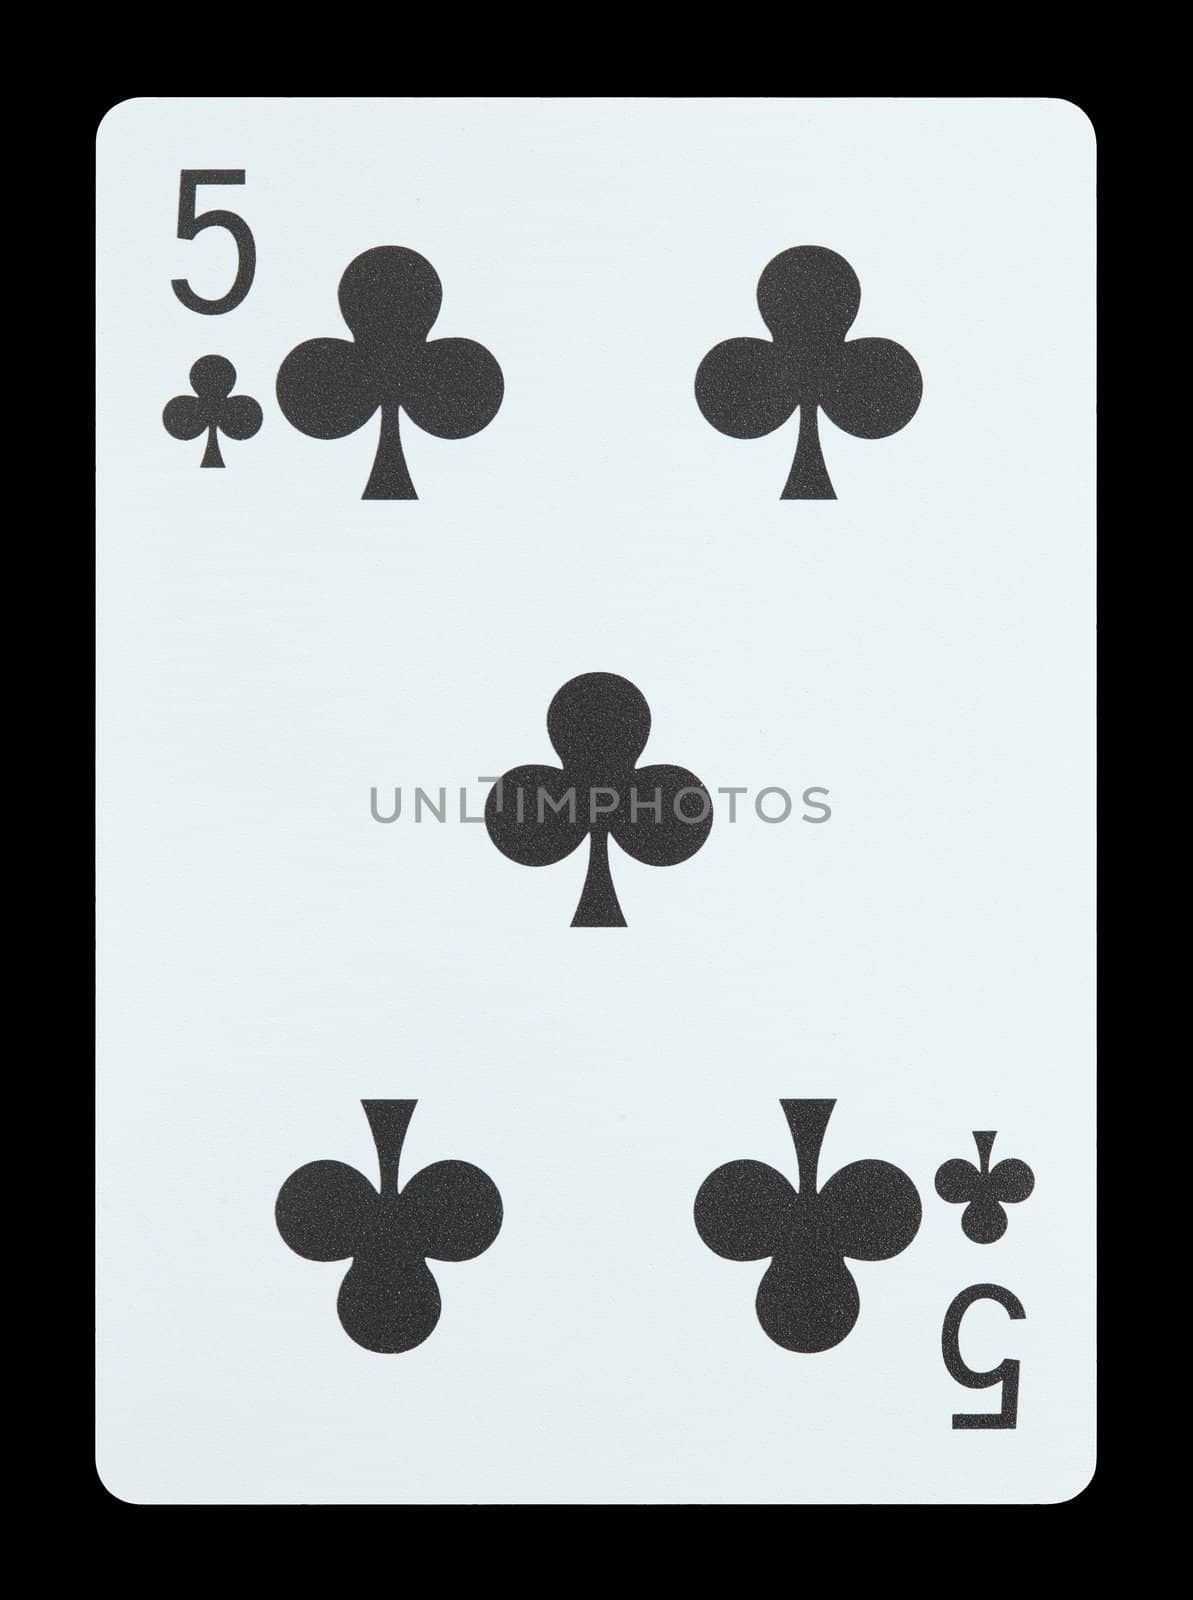 Playing cards - Five of clubs